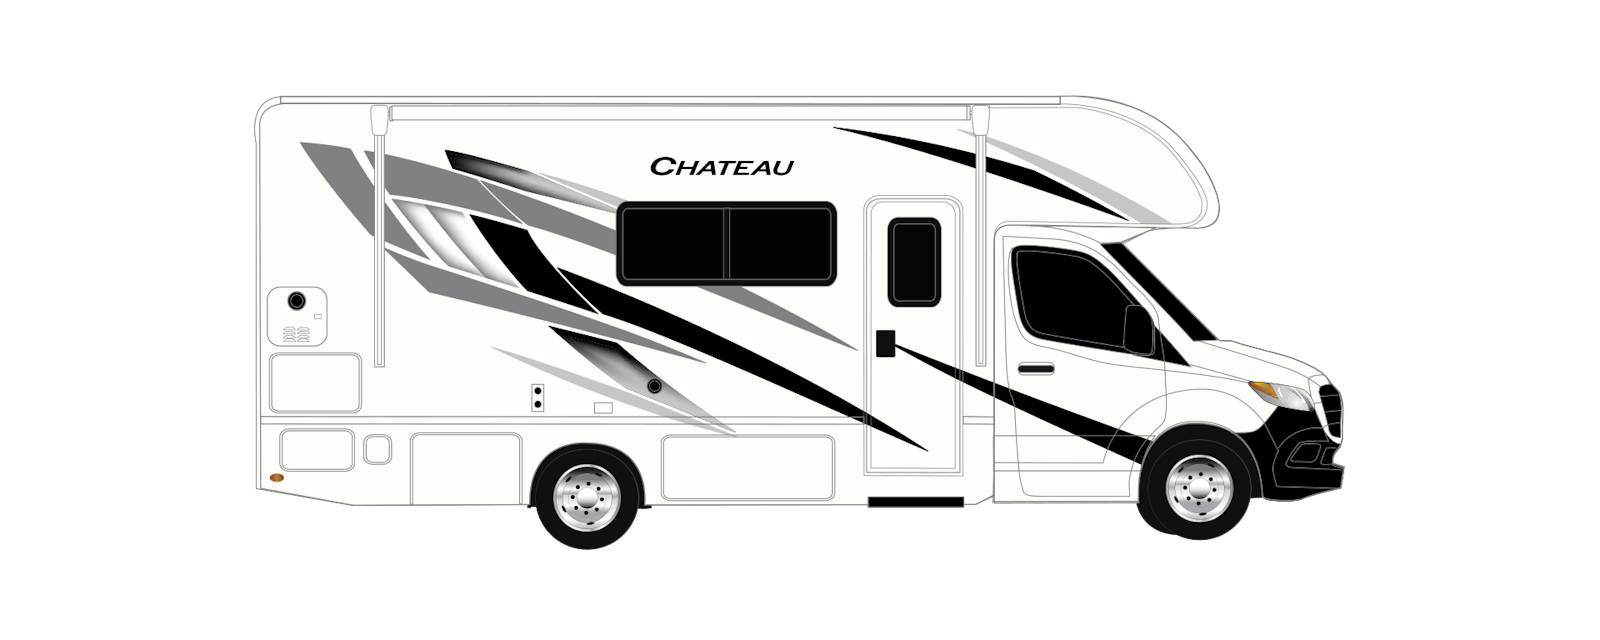 Chateau Sprinter Perfect Storm